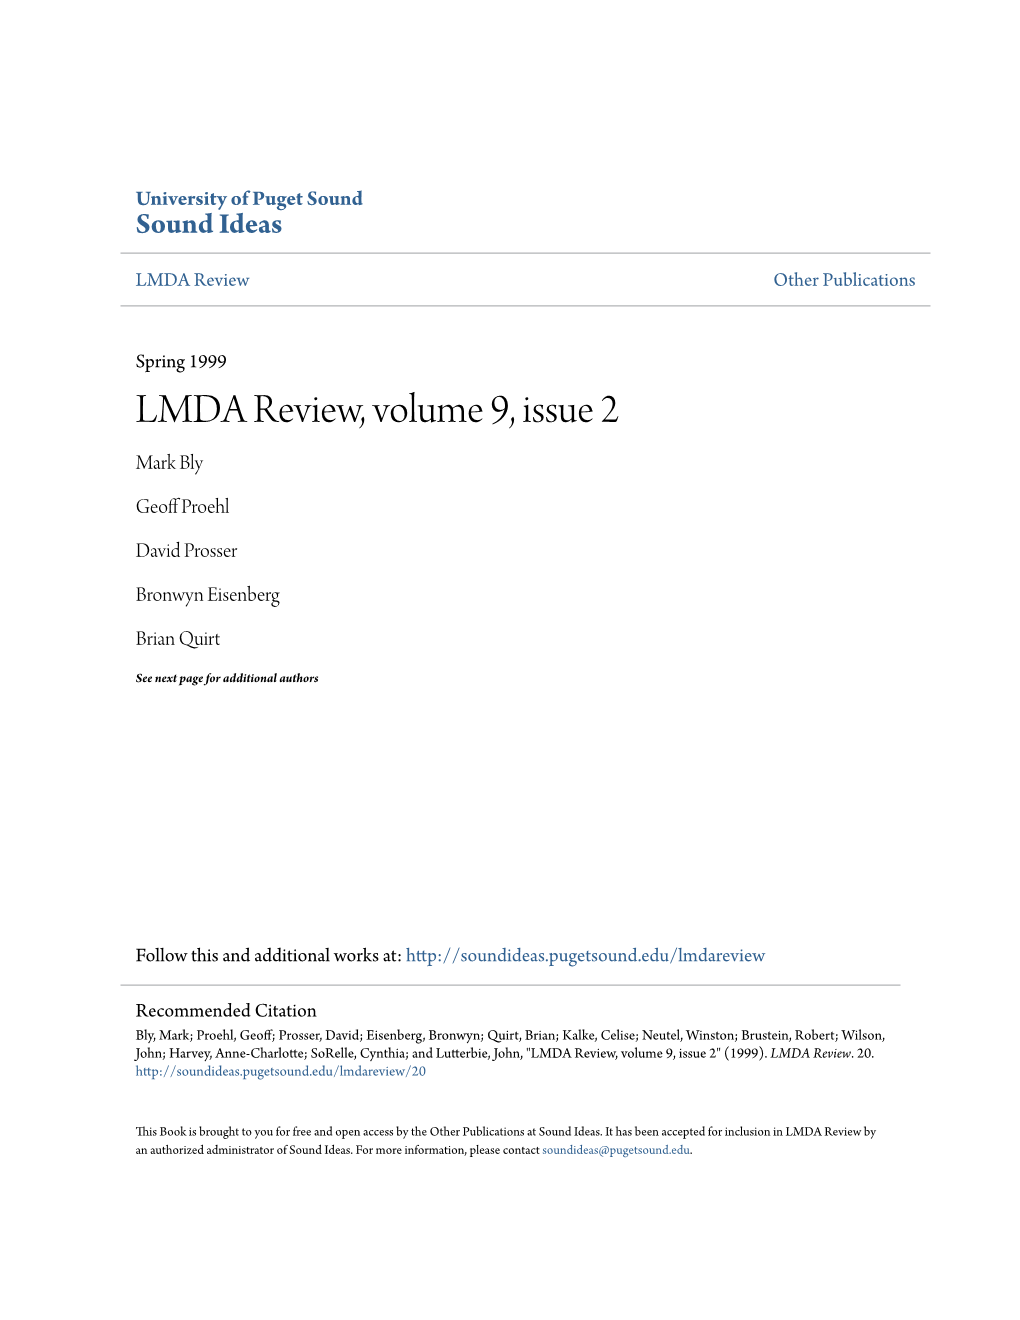 LMDA Review, Volume 9, Issue 2 Mark Bly